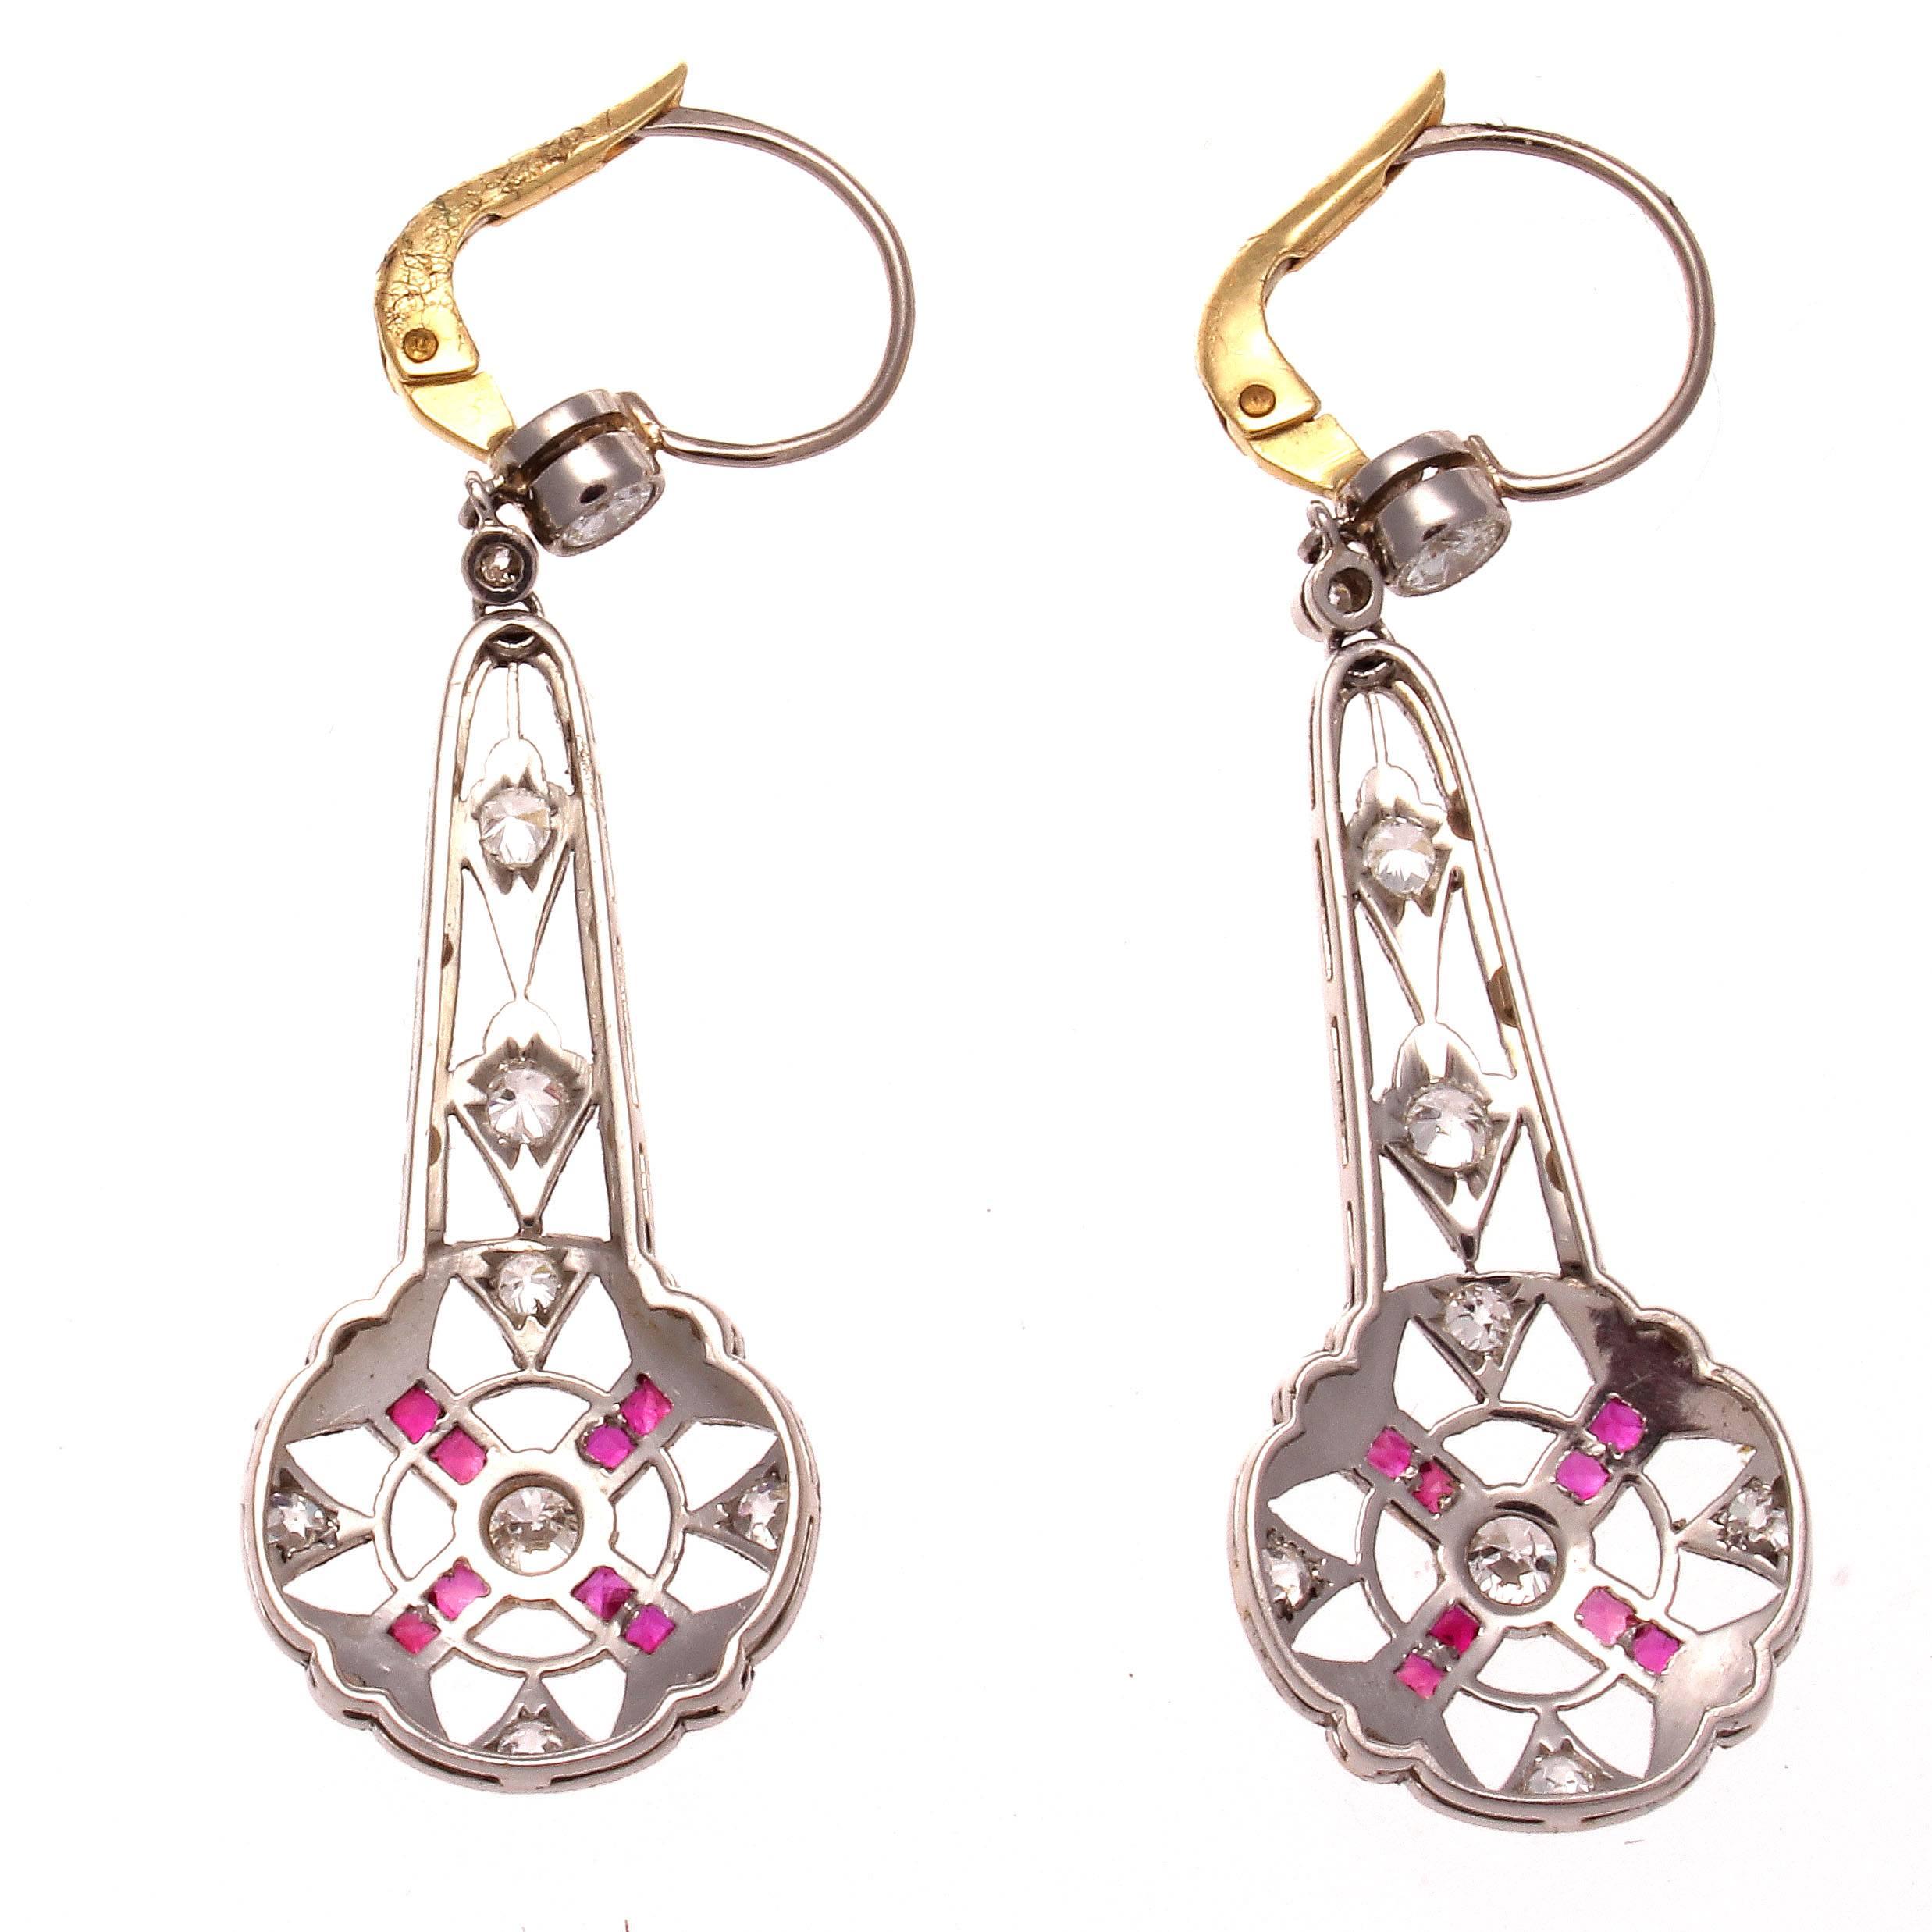 Brilliance through artistic design influenced by the era that changed jewelry forever. The art deco earrings focus on the use of color and symmetry to create this eye pleasing design. Featuring numerous perfectly placed diamonds that is perfectly